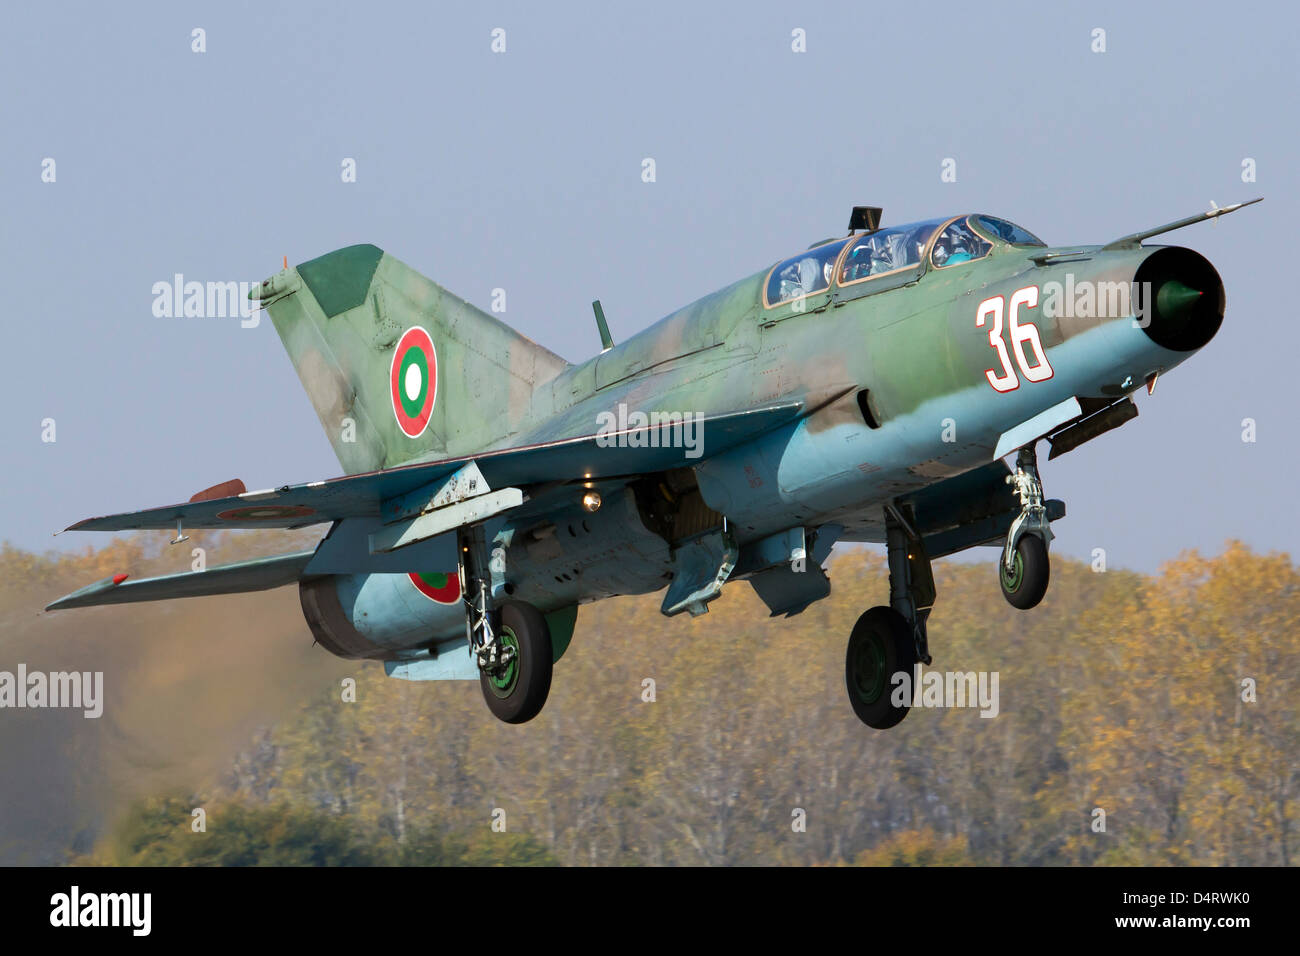 A Bulgarian Air Force MiG-21UM jet fighter taking off from Graf Ignatievo Air Base, Bulgaria. Stock Photo